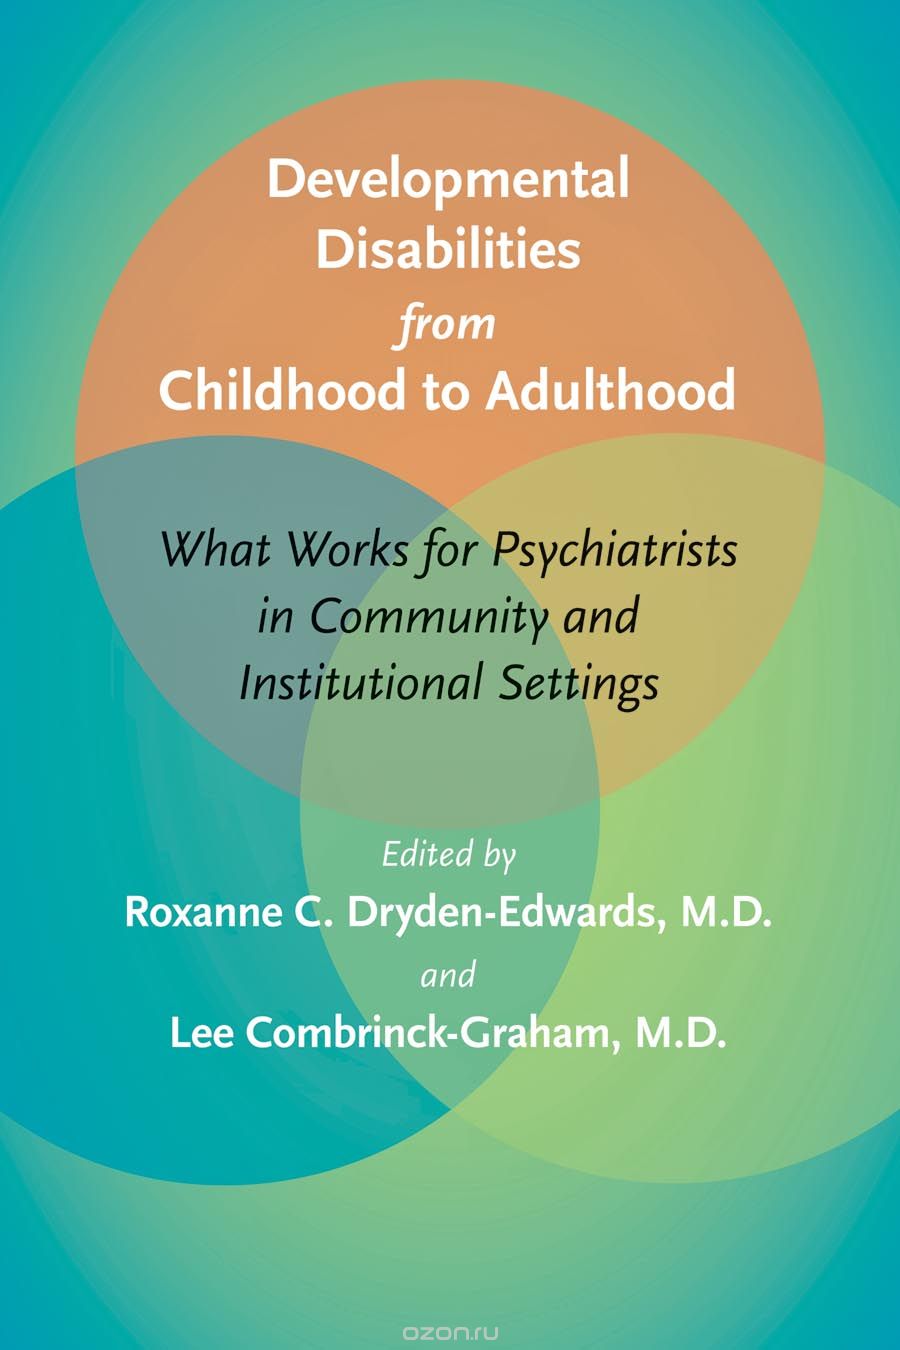 Скачать книгу "Developmental Disabilities from Childhood to Adulthood – What Works for Psychiatrists in Community and Institutional Settings"